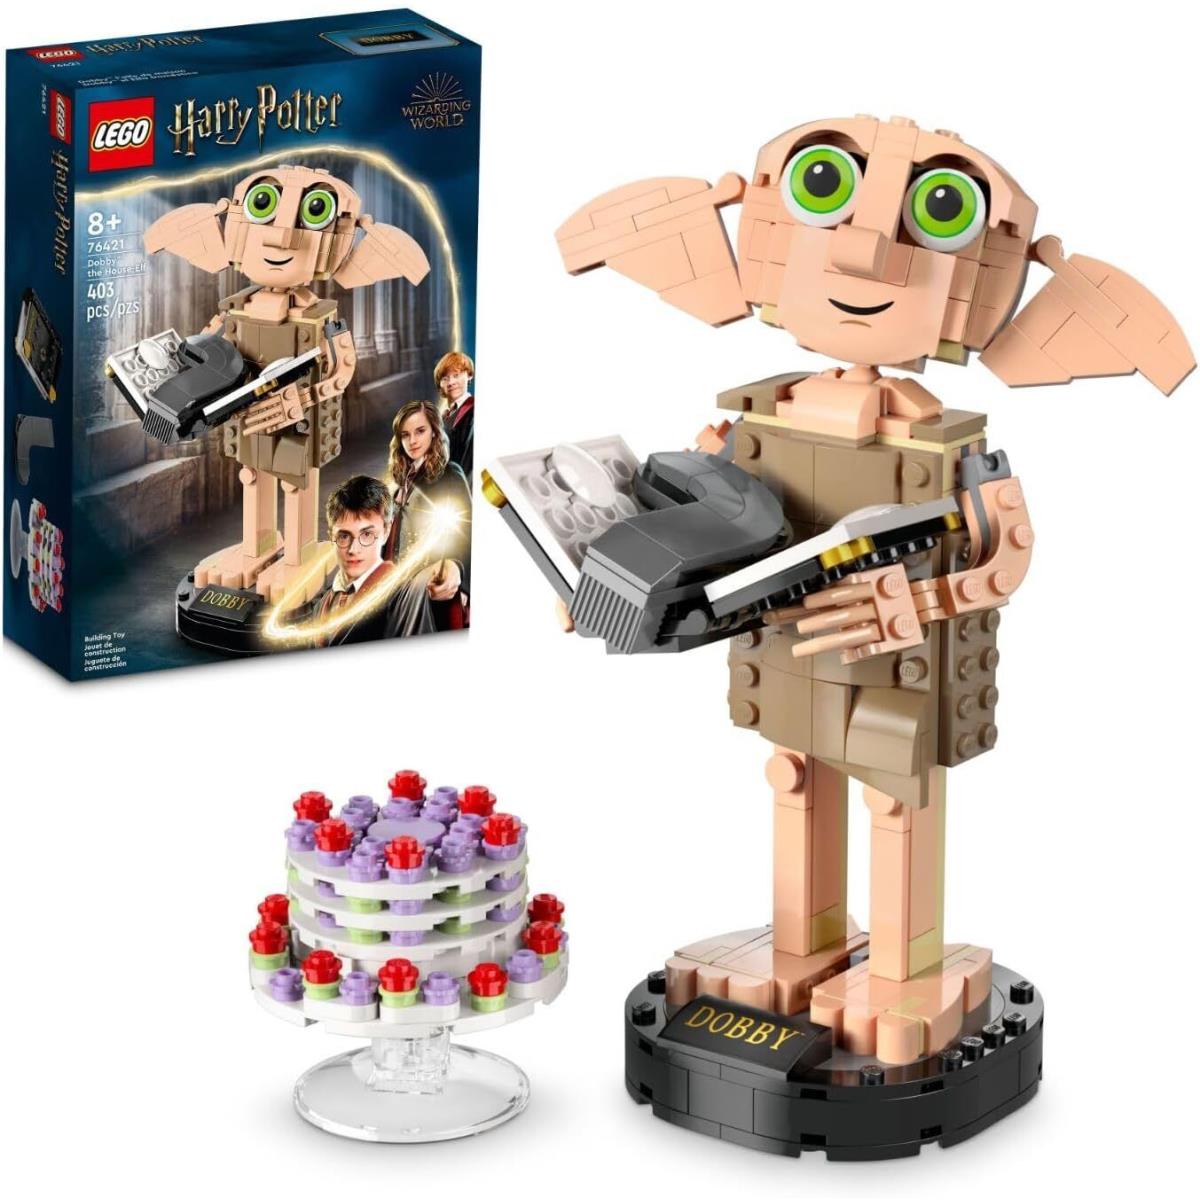 Harry Potter Dobby The House-elf Building Toy Set Build and Display Model